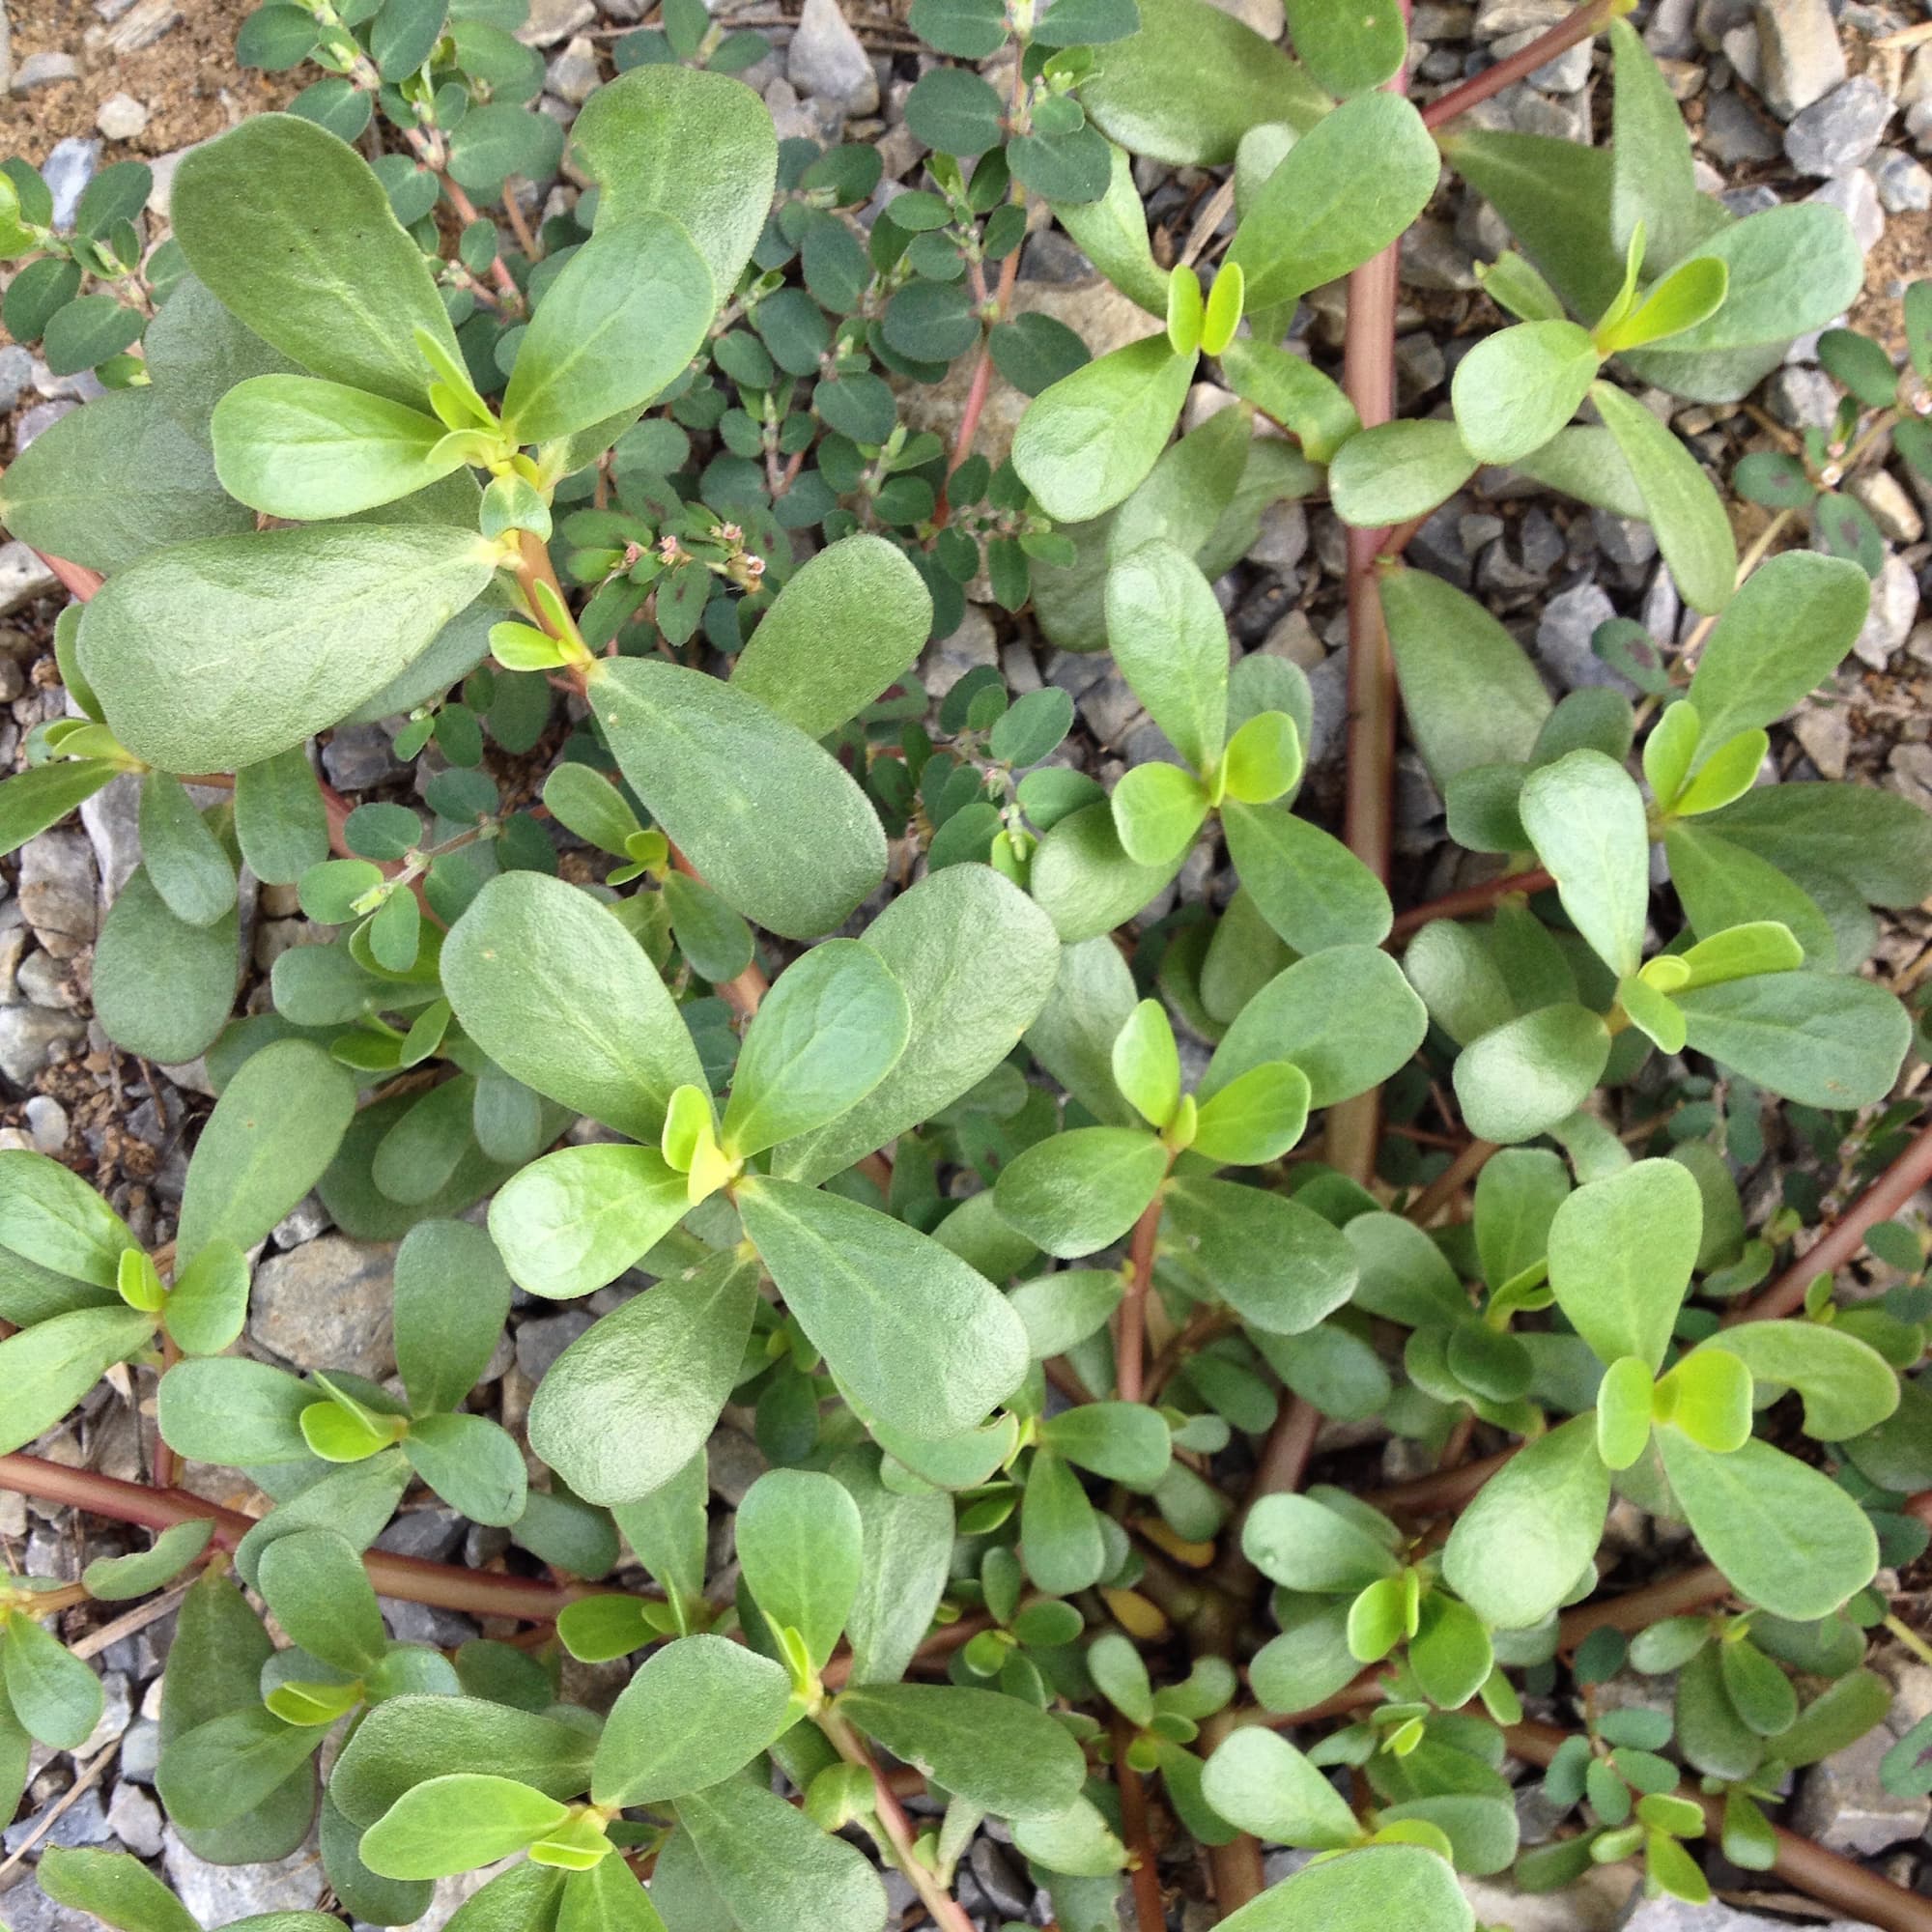 Notice the spurge growing underneath the purslane in this photo. Don't get them mixed up!